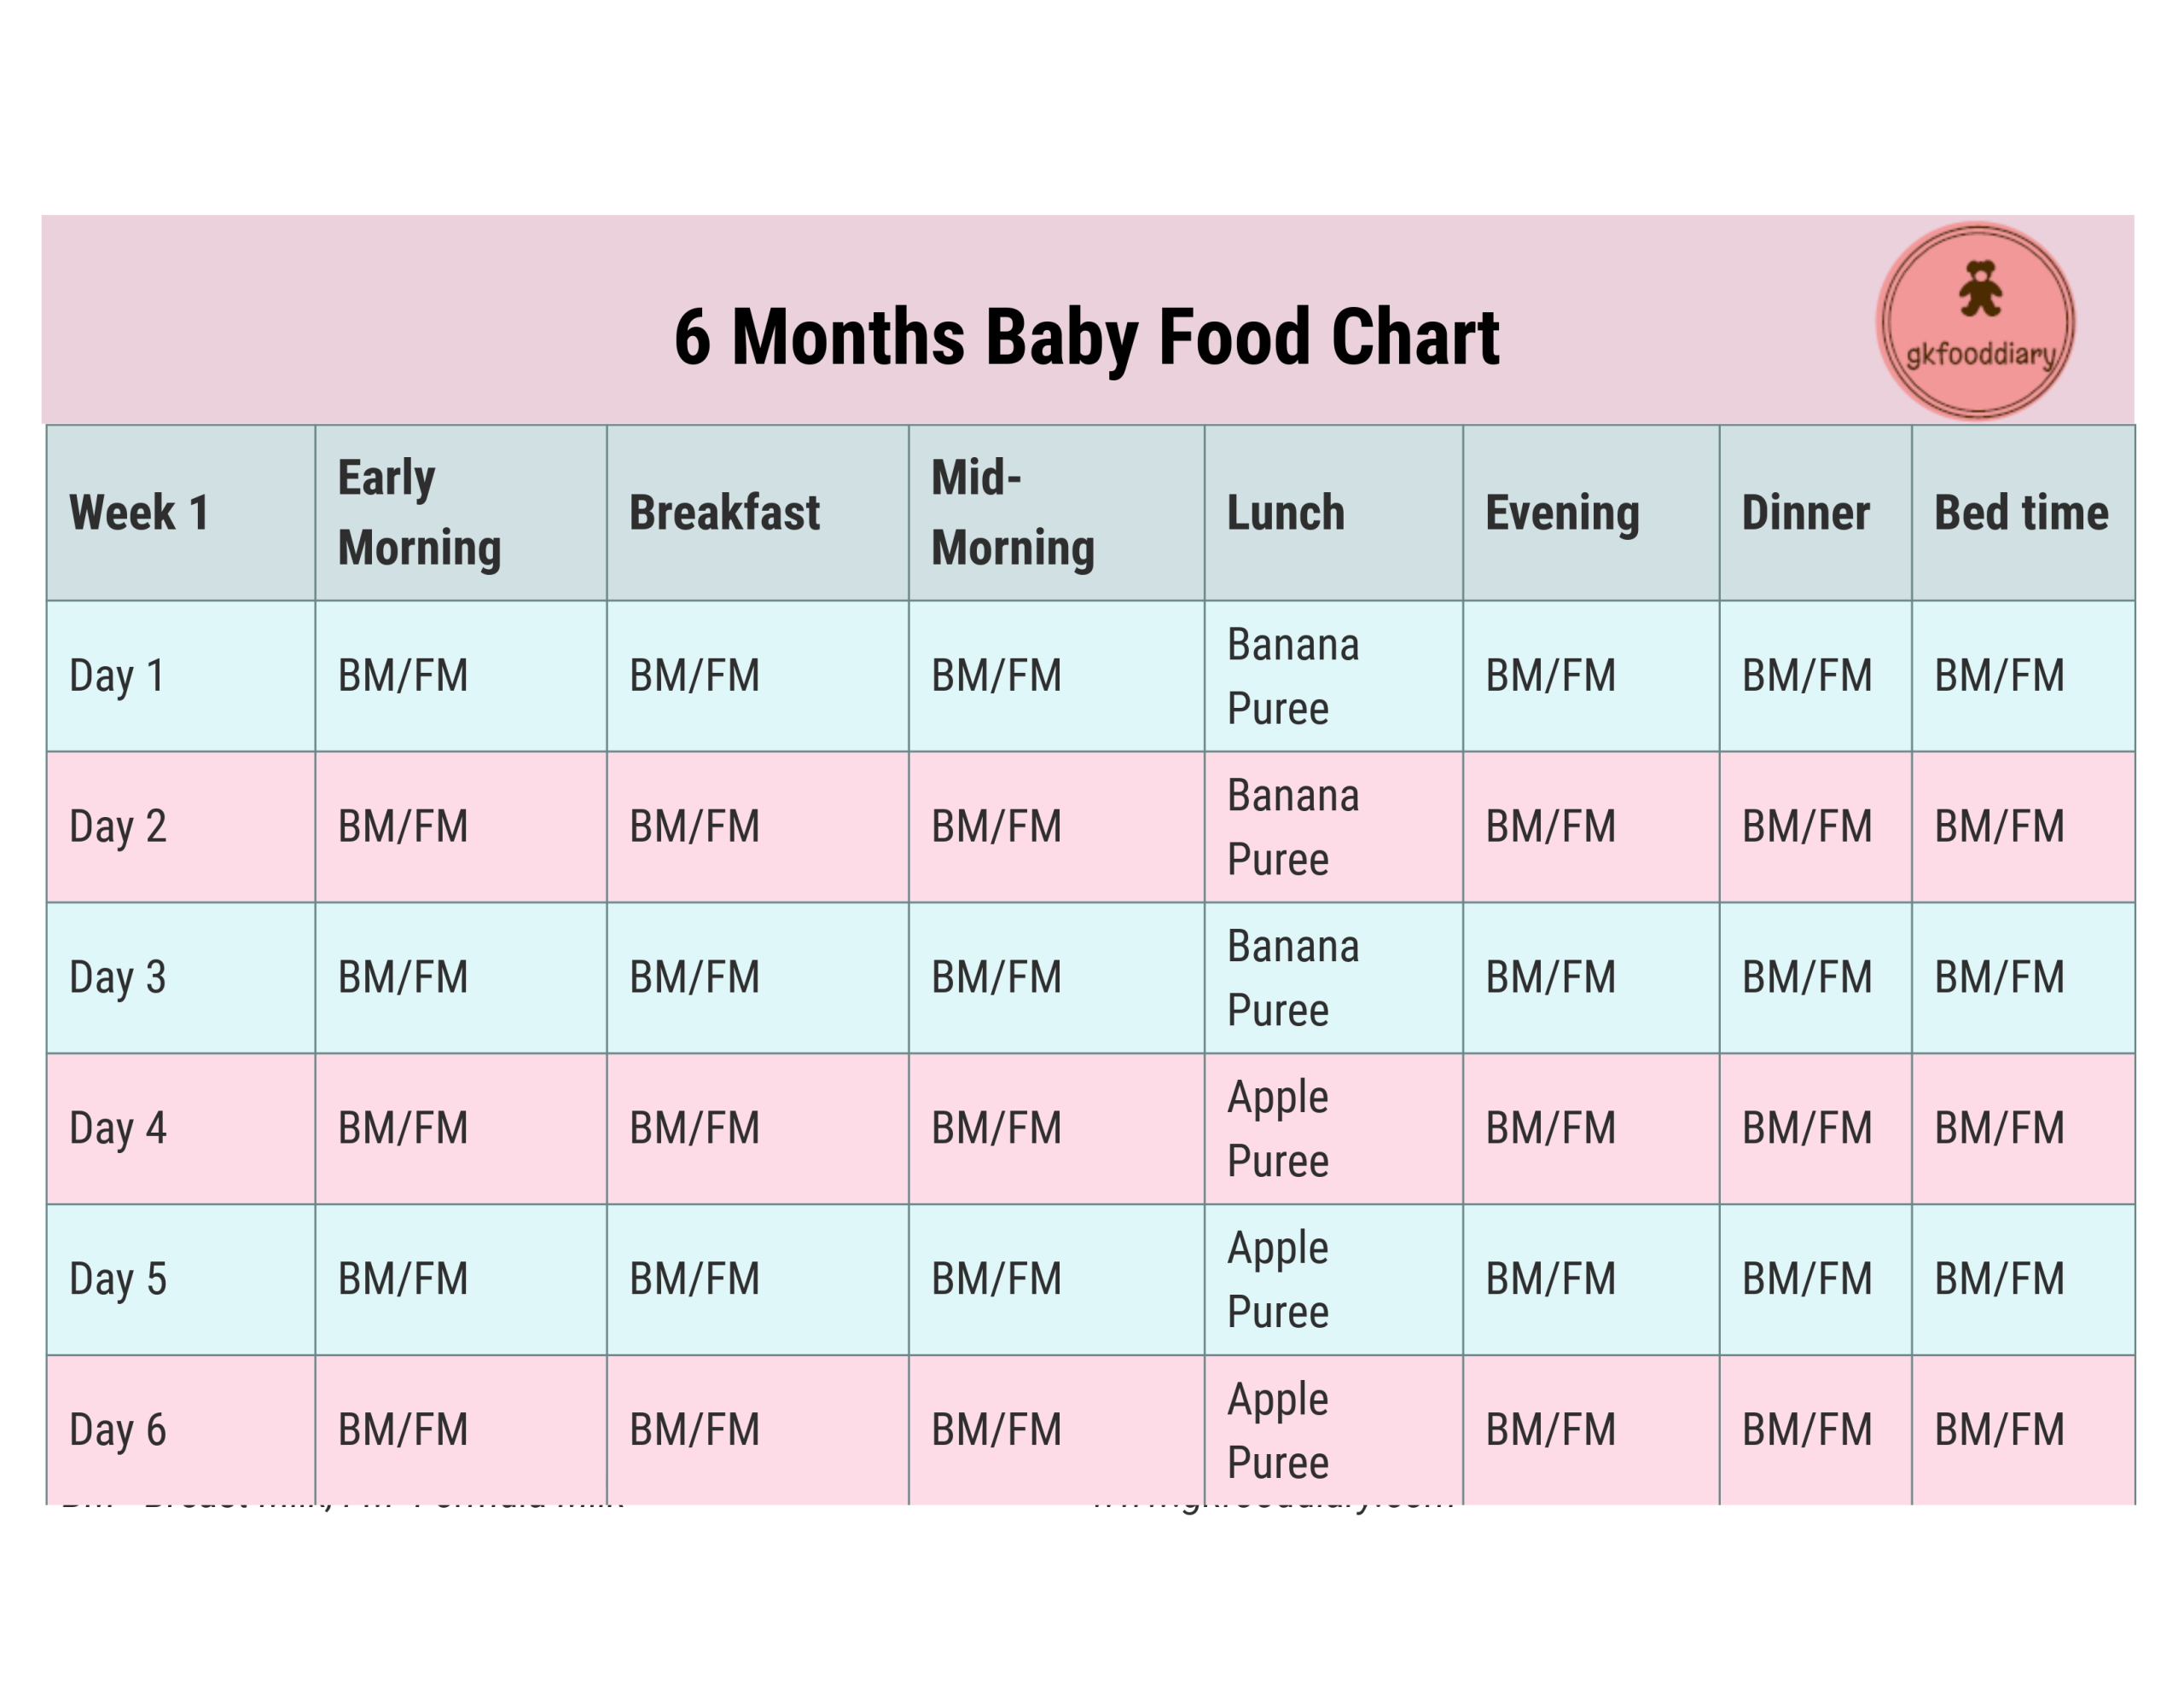 6 Month Baby Food Chart Week 1